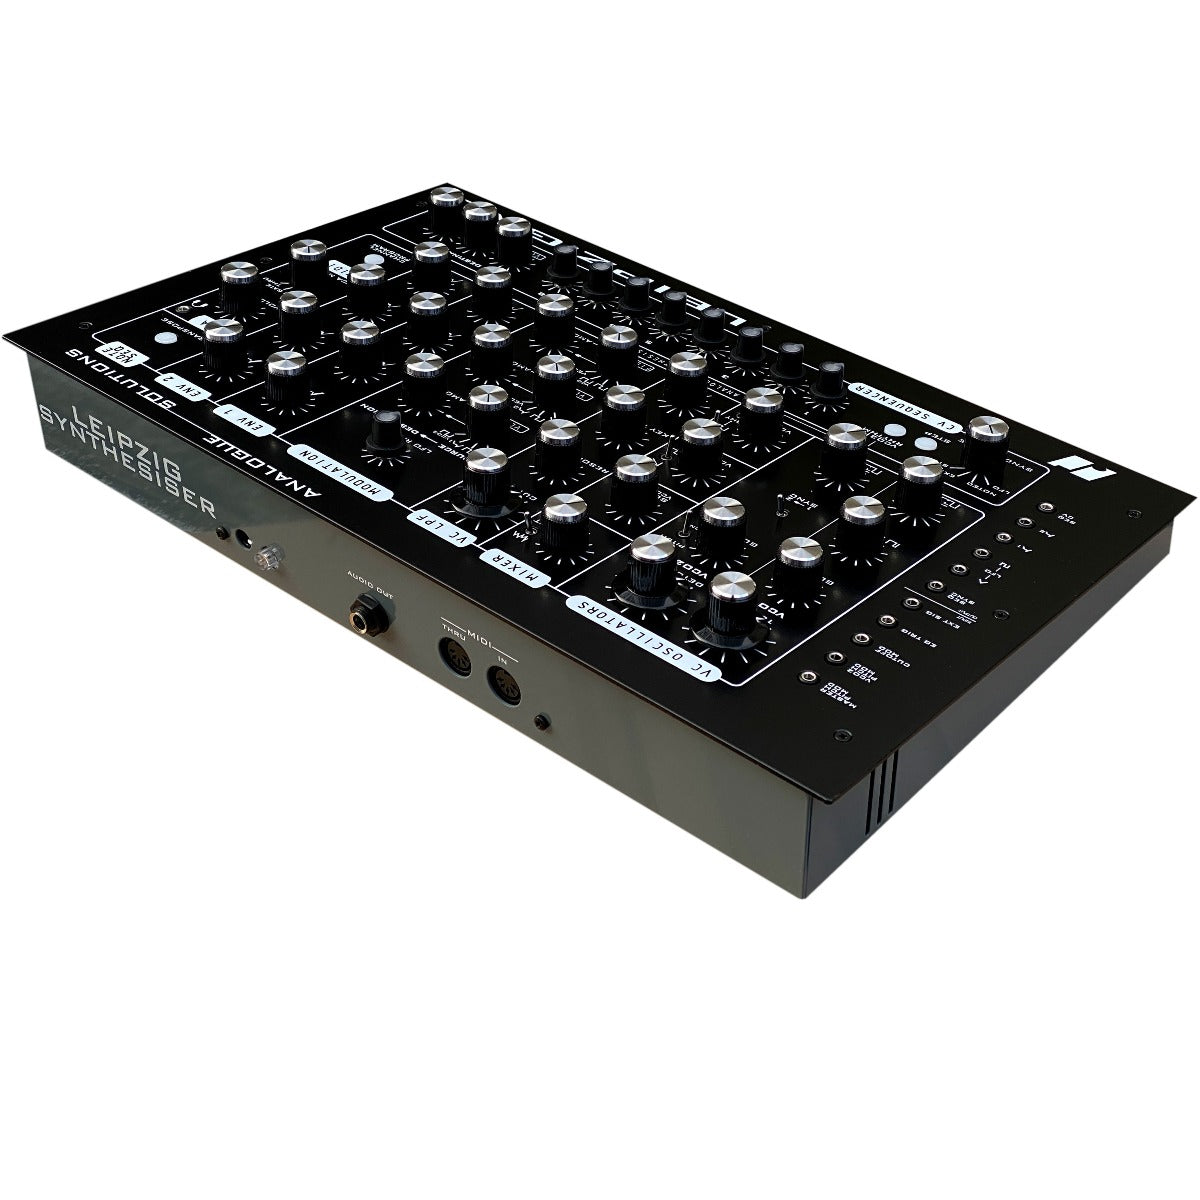 3/4 view of Analogue Solutions Leipzig v3 Monophonic Analog Synthesizer showing top, rear and left side